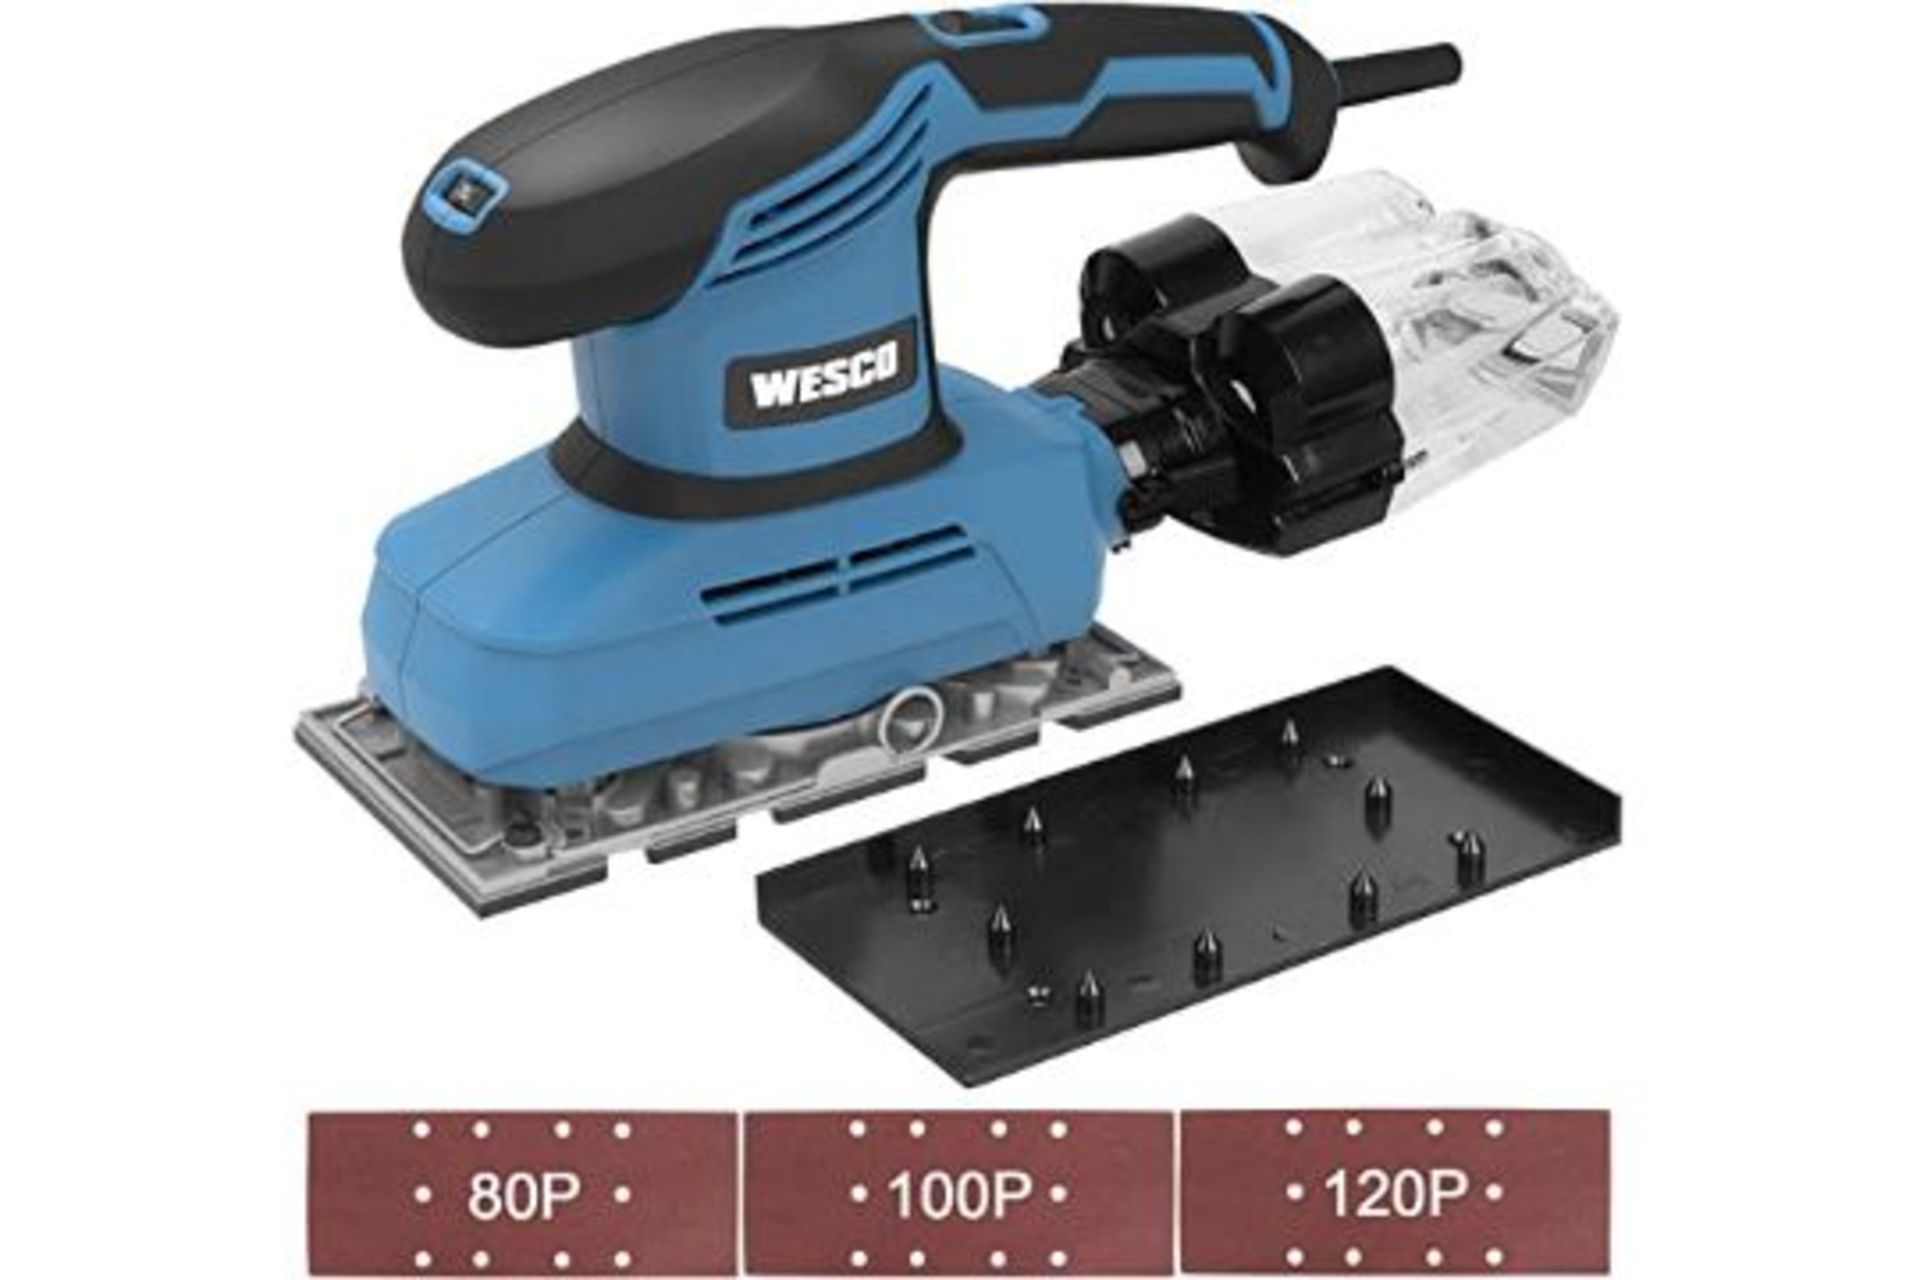 2 X NEW BOXED WESCO 240W 1/3 Sheet Sander with Aluminum Base, 7 Variable Speed Electric Orbital